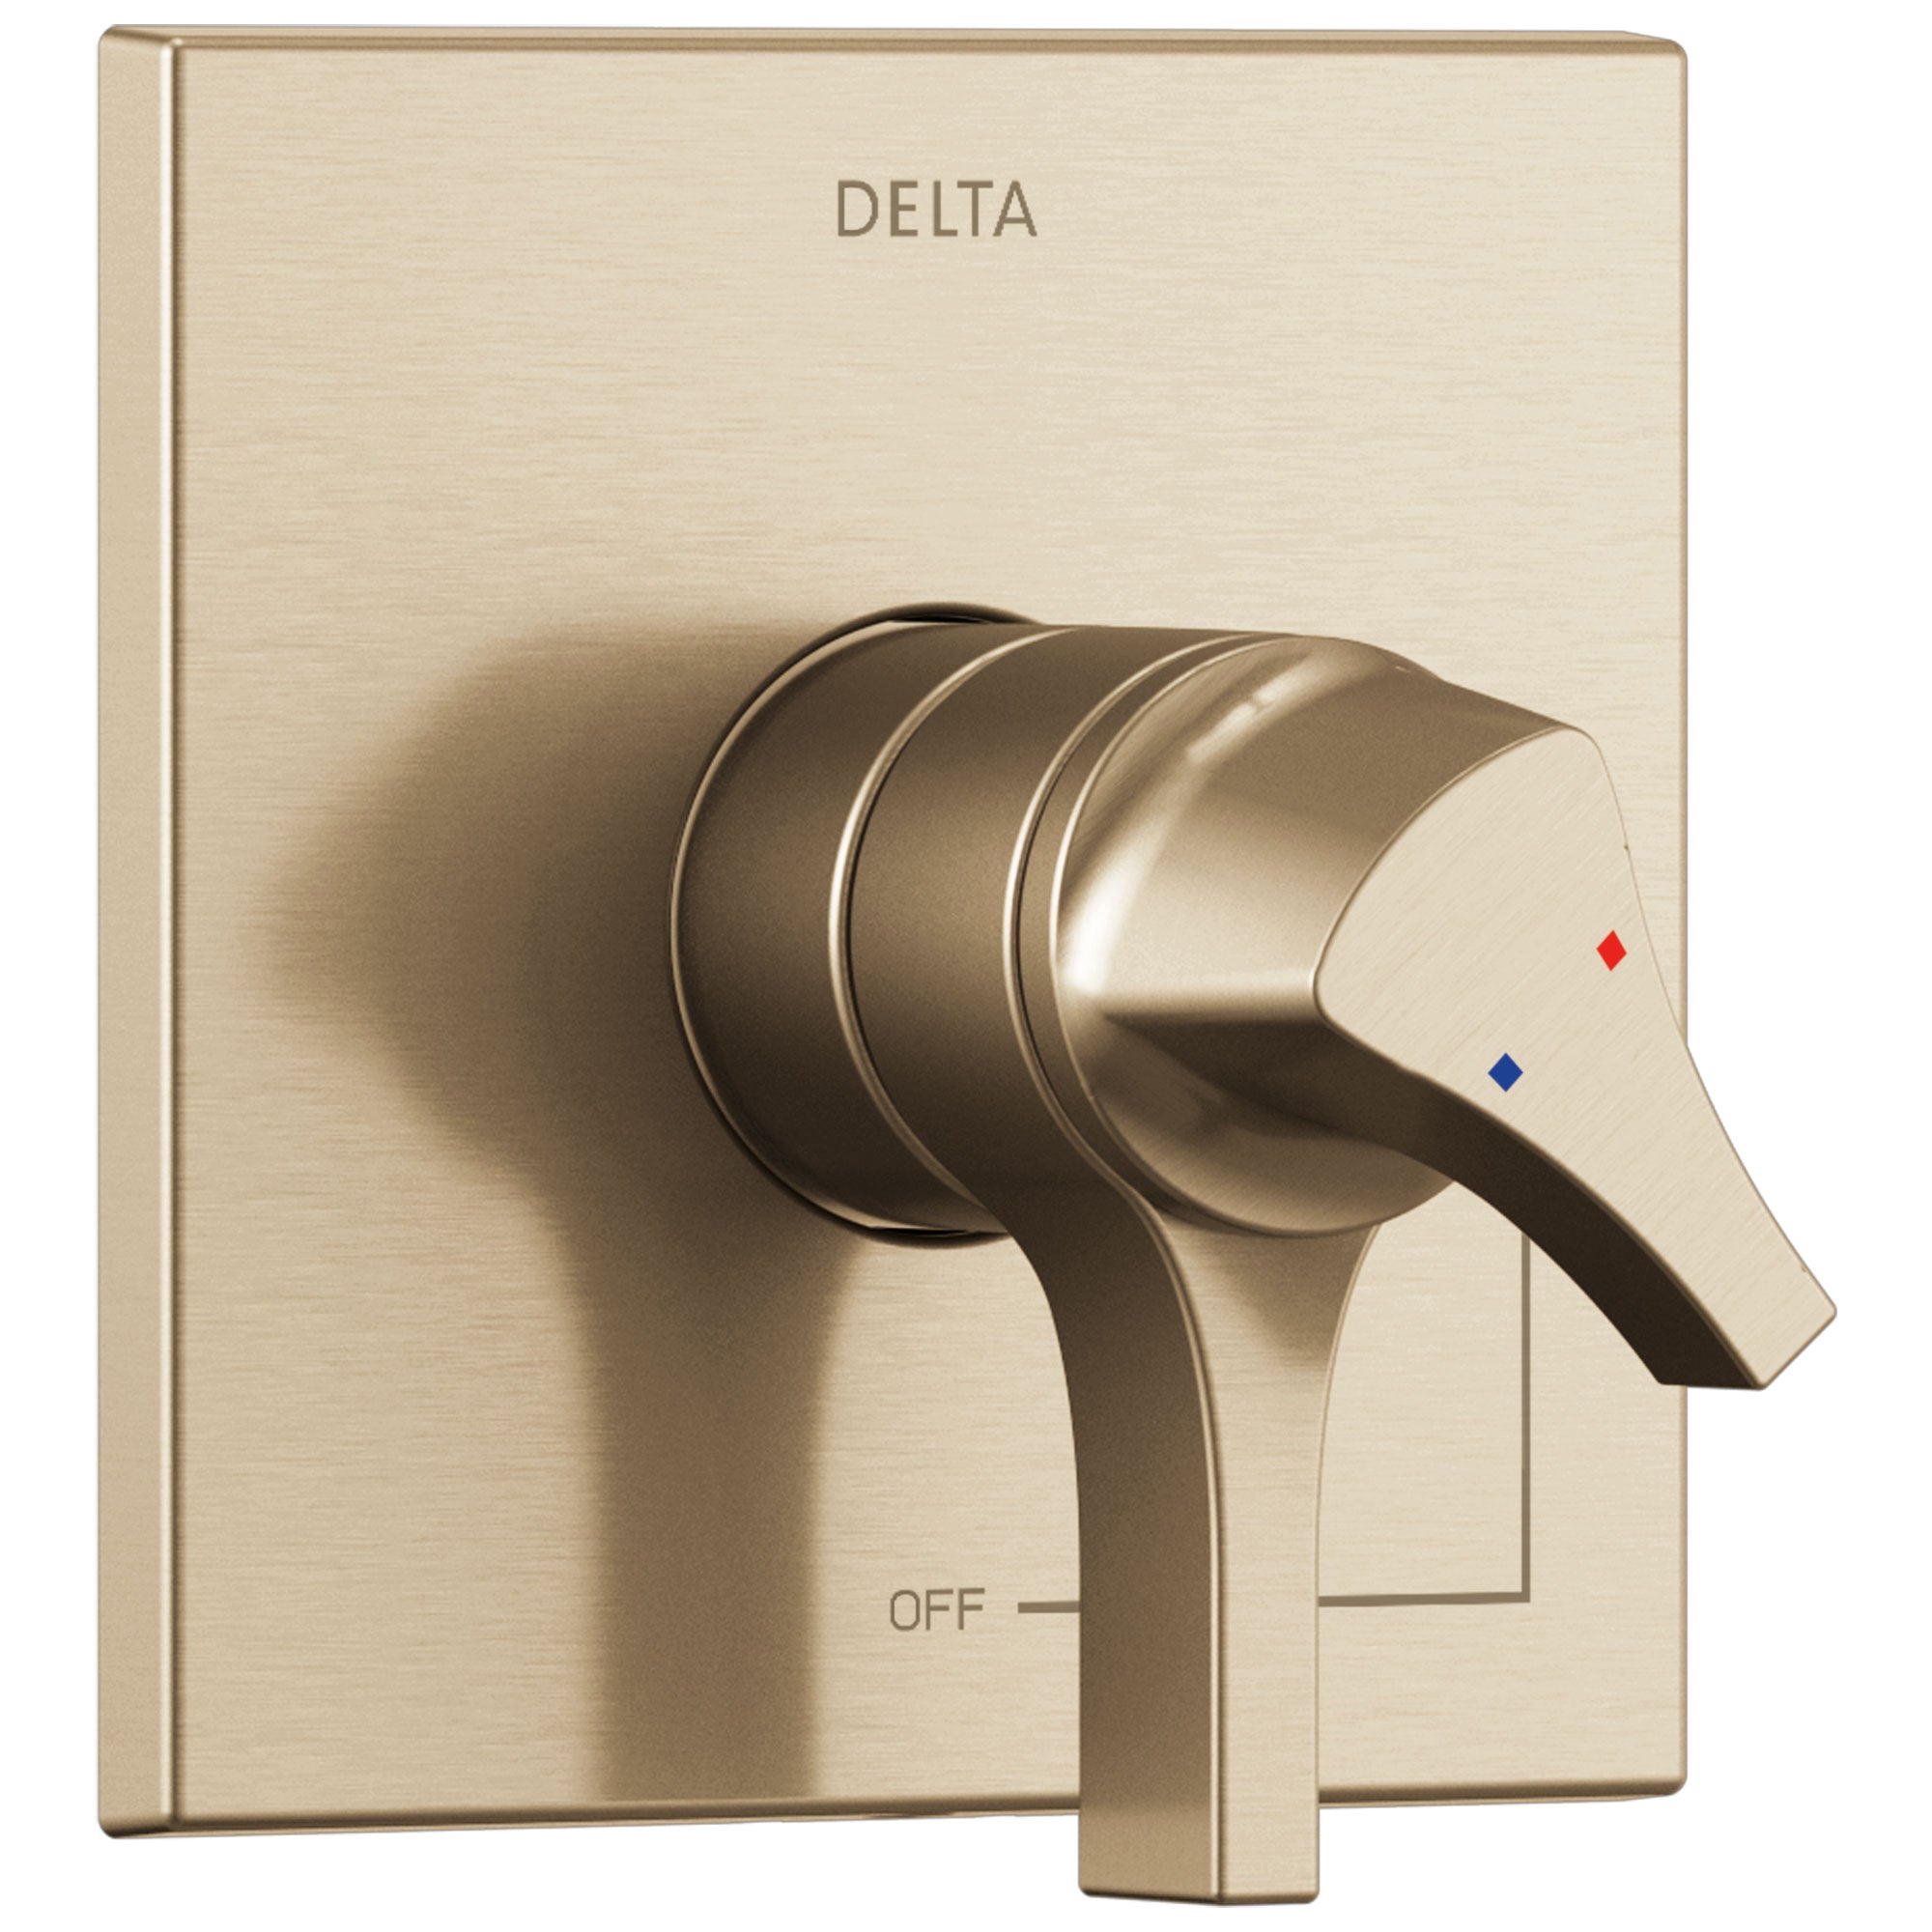 Delta Zura Champagne Bronze Finish Monitor 17 Series Shower Faucet Control Only Includes Cartridge, Handles, and Valve with Stops D3408V